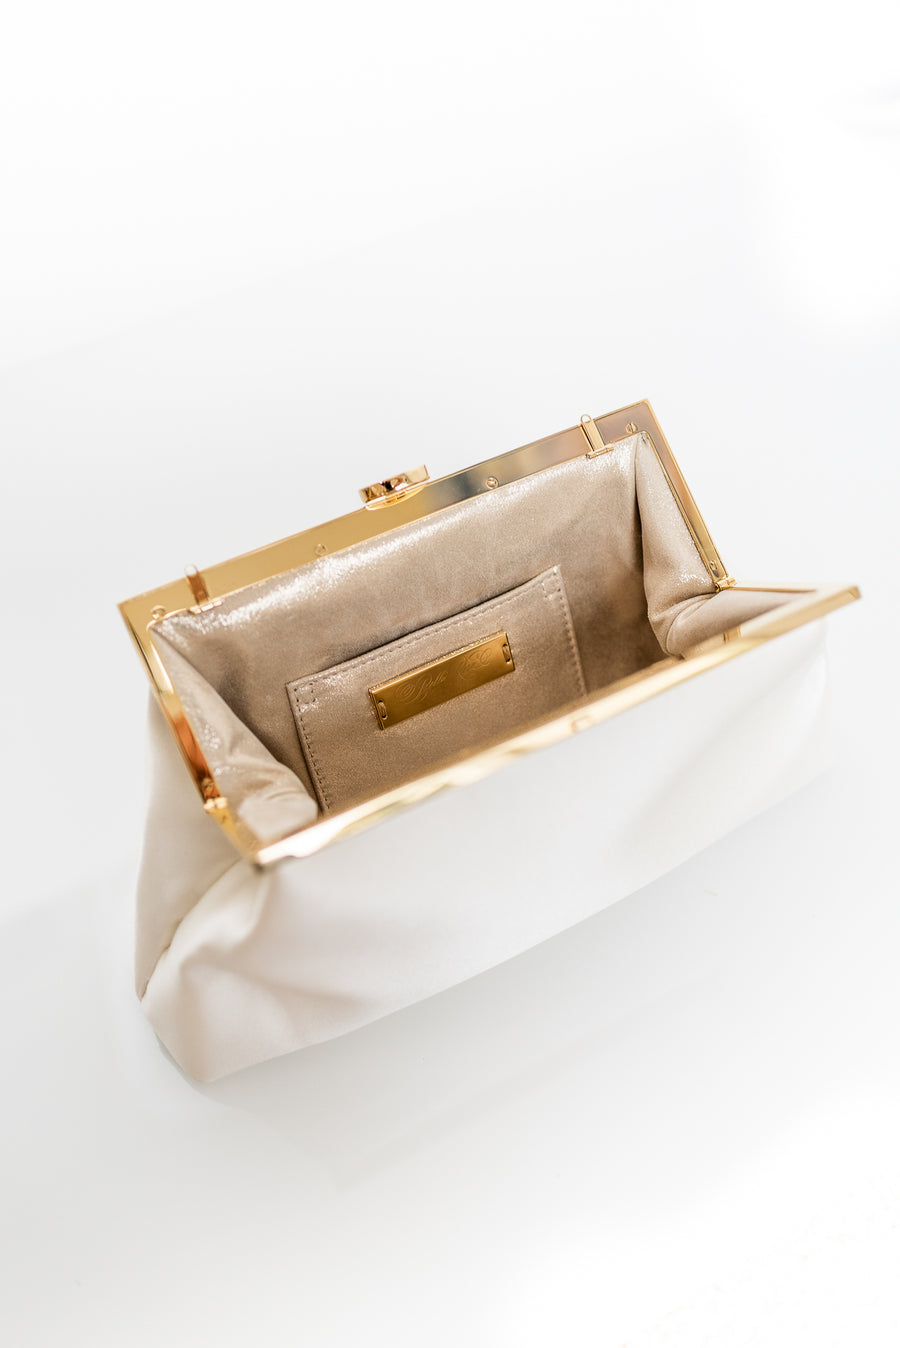 Open view of Rosa Clutch in Ivory white satin with gold hardware clasp frame.